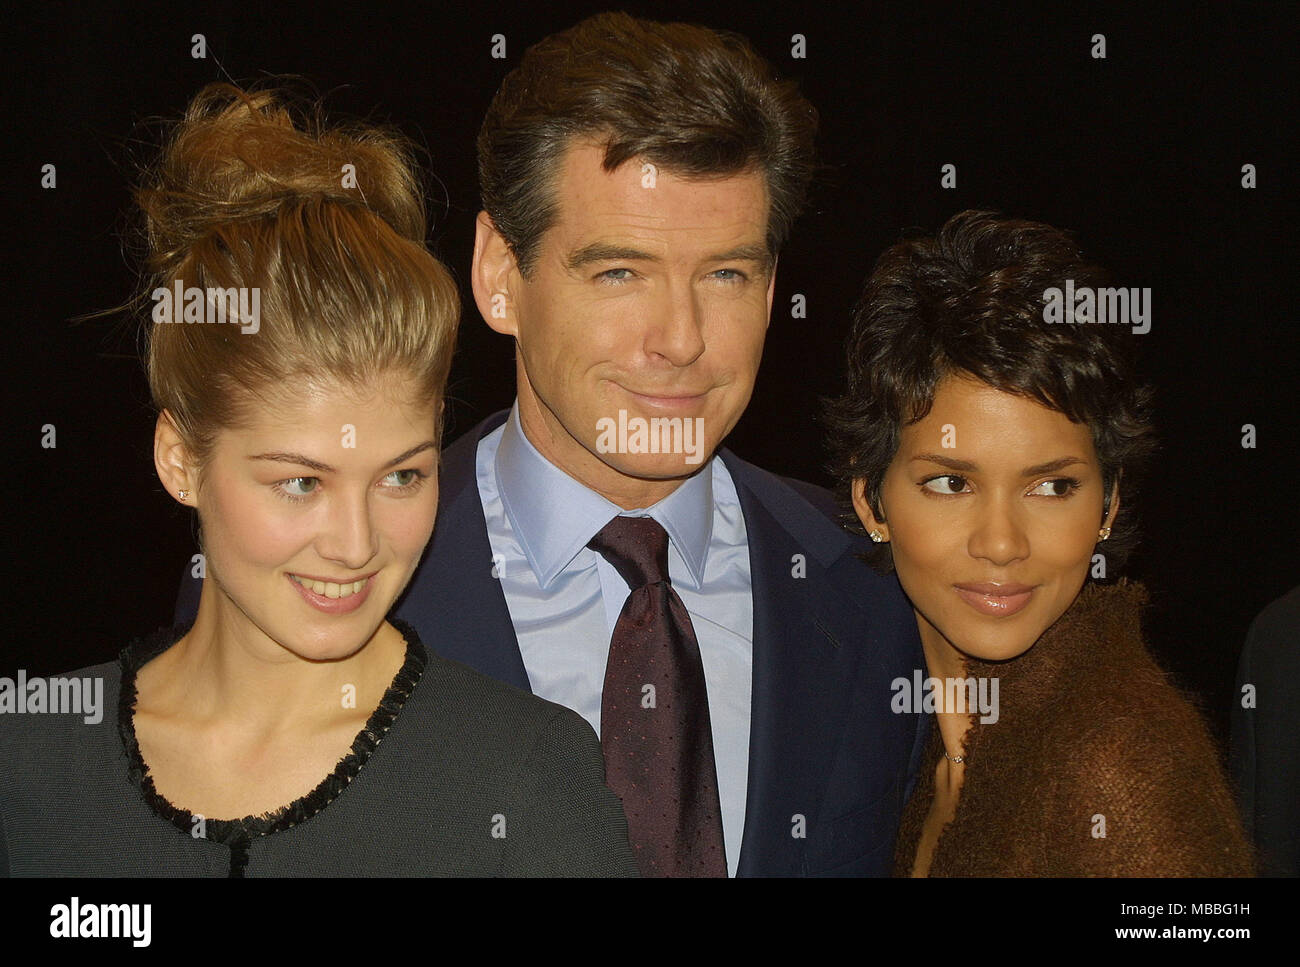 Pierce Brosnan at the Pinewood Studios for the James Bond film Die Another Day  with Rosamund Pike (left) and Halle Berry Stock Photo